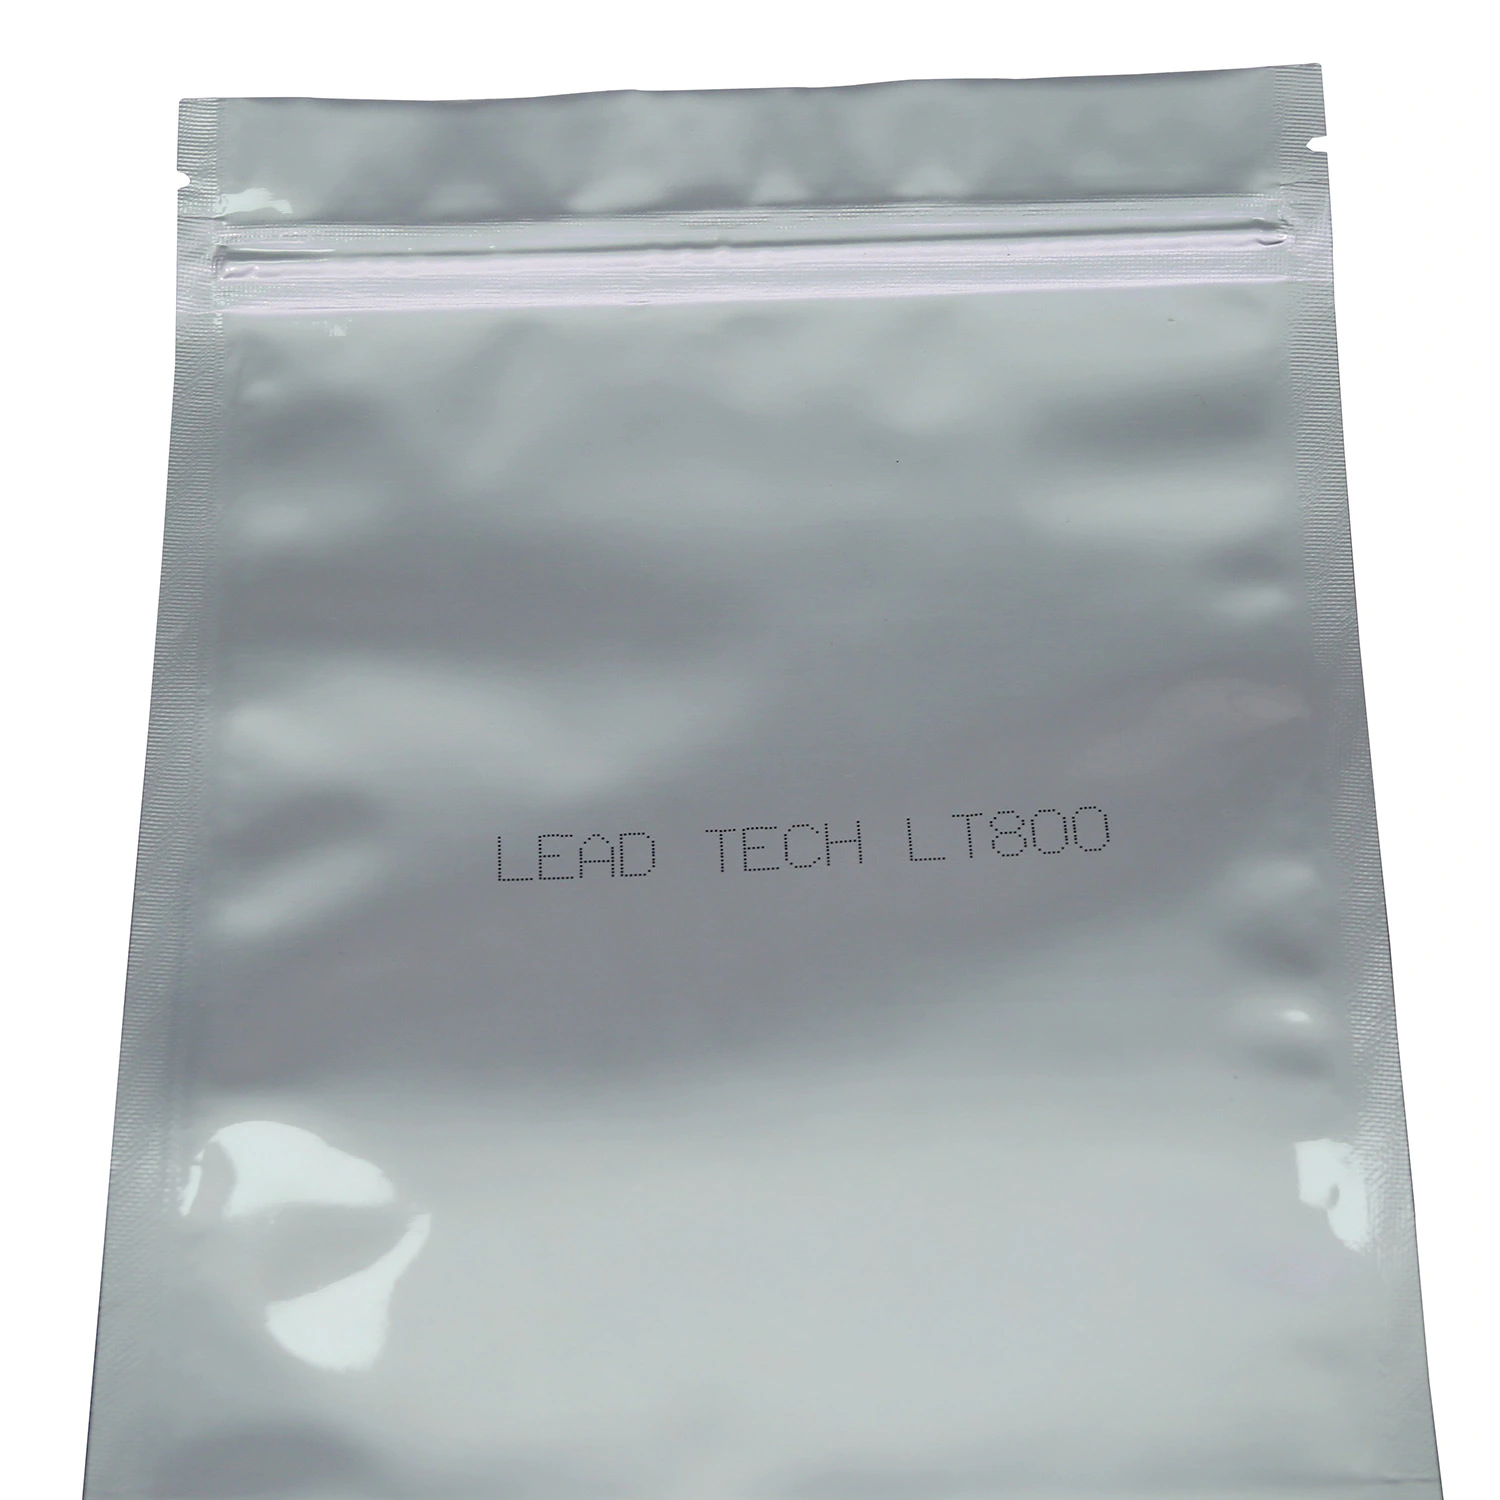 Lead Tech Lt800 Continuous Inkjet Print for Textile Printing